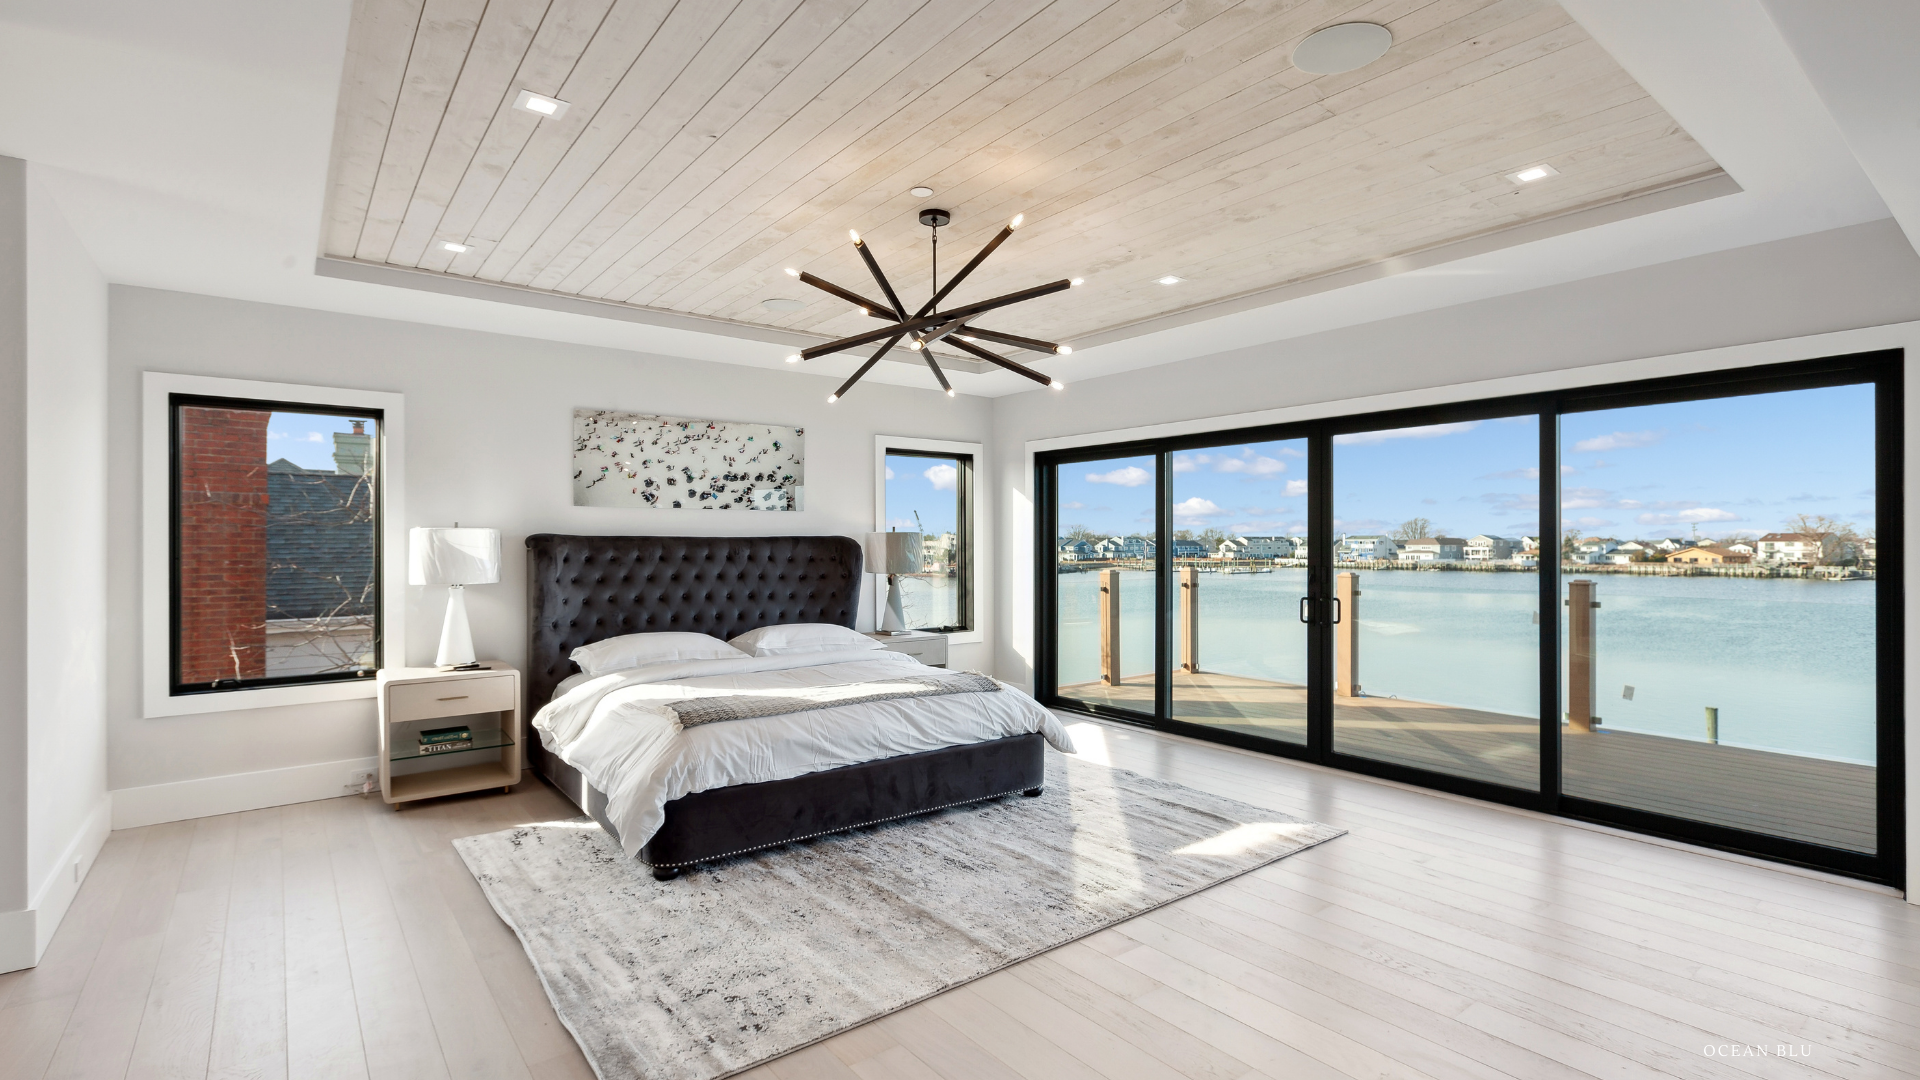 Ocean Blu Interior Designers Waterfront, NY Long Island Home Project Long Beach, New Construction